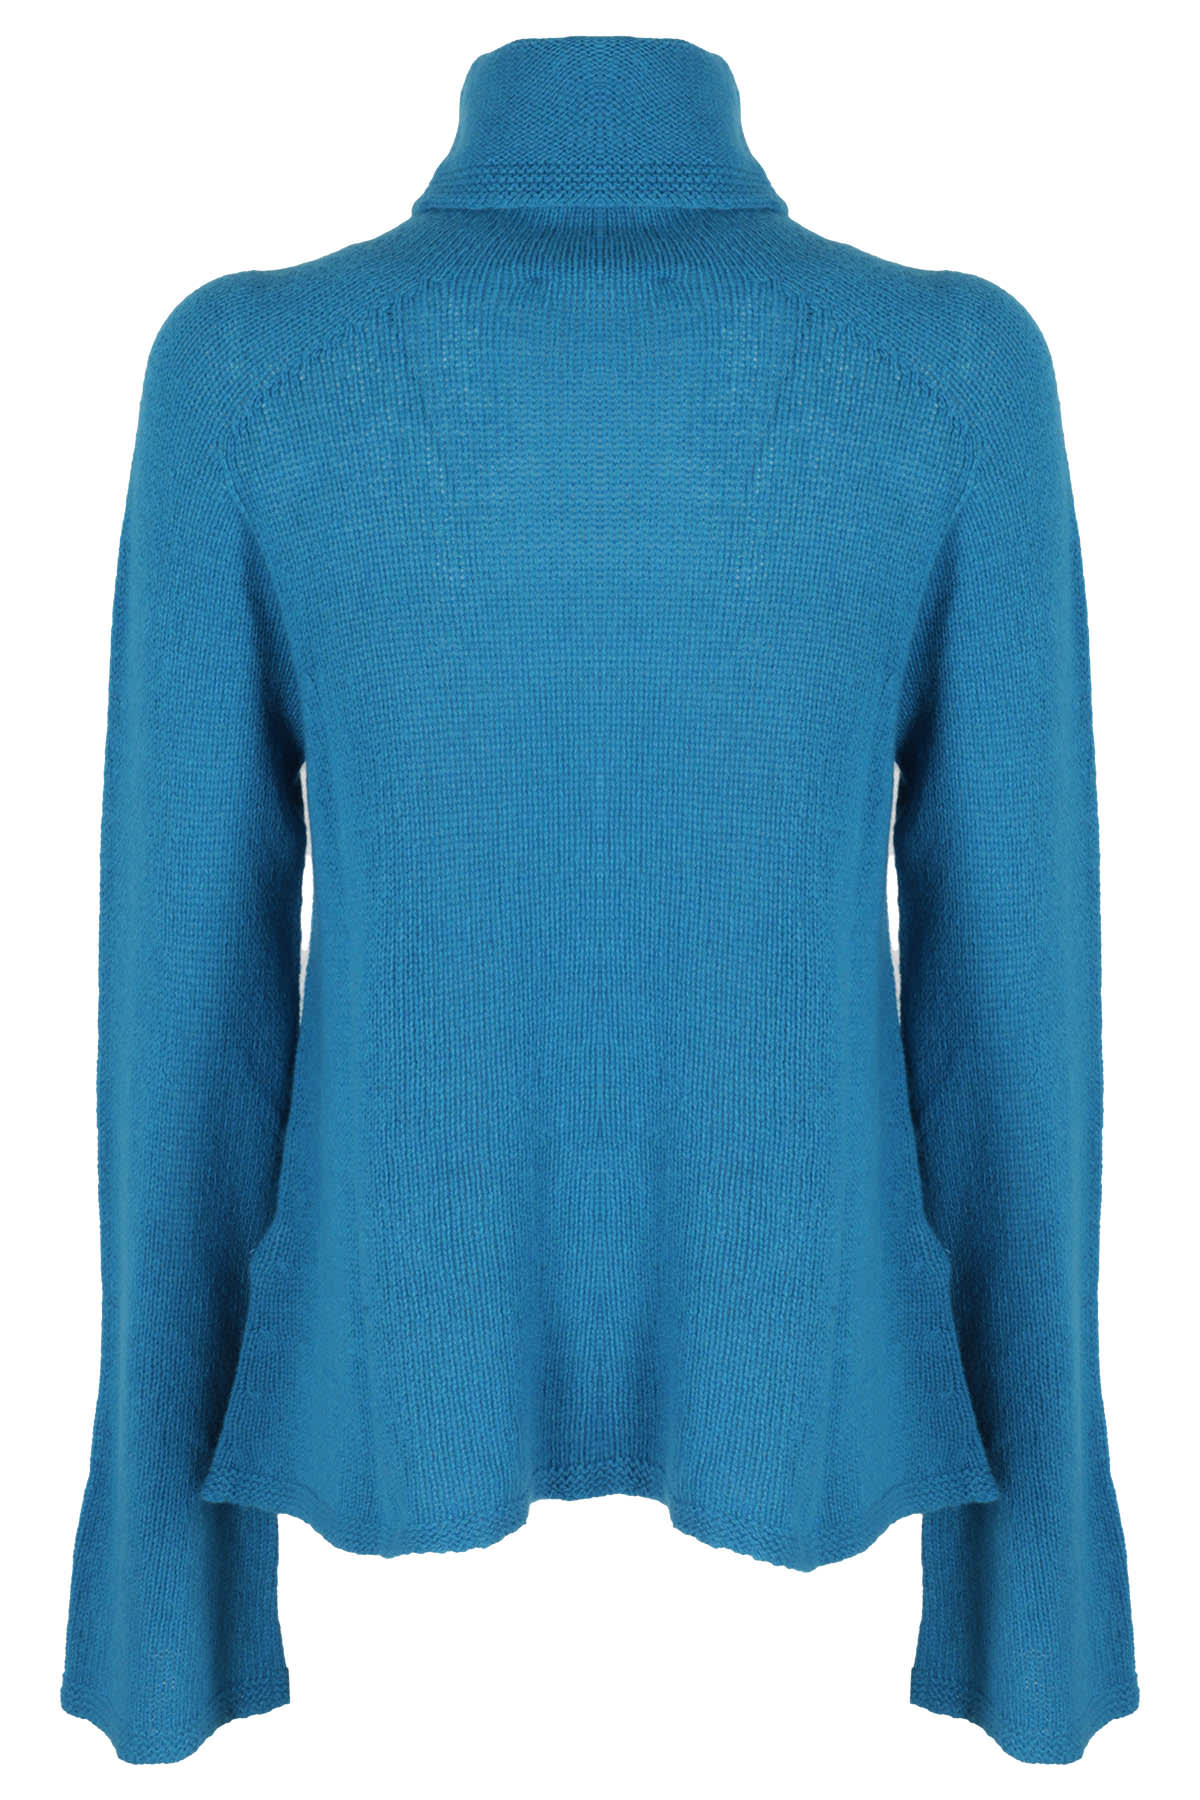 Shop Semicouture Ginger In Blu Reale